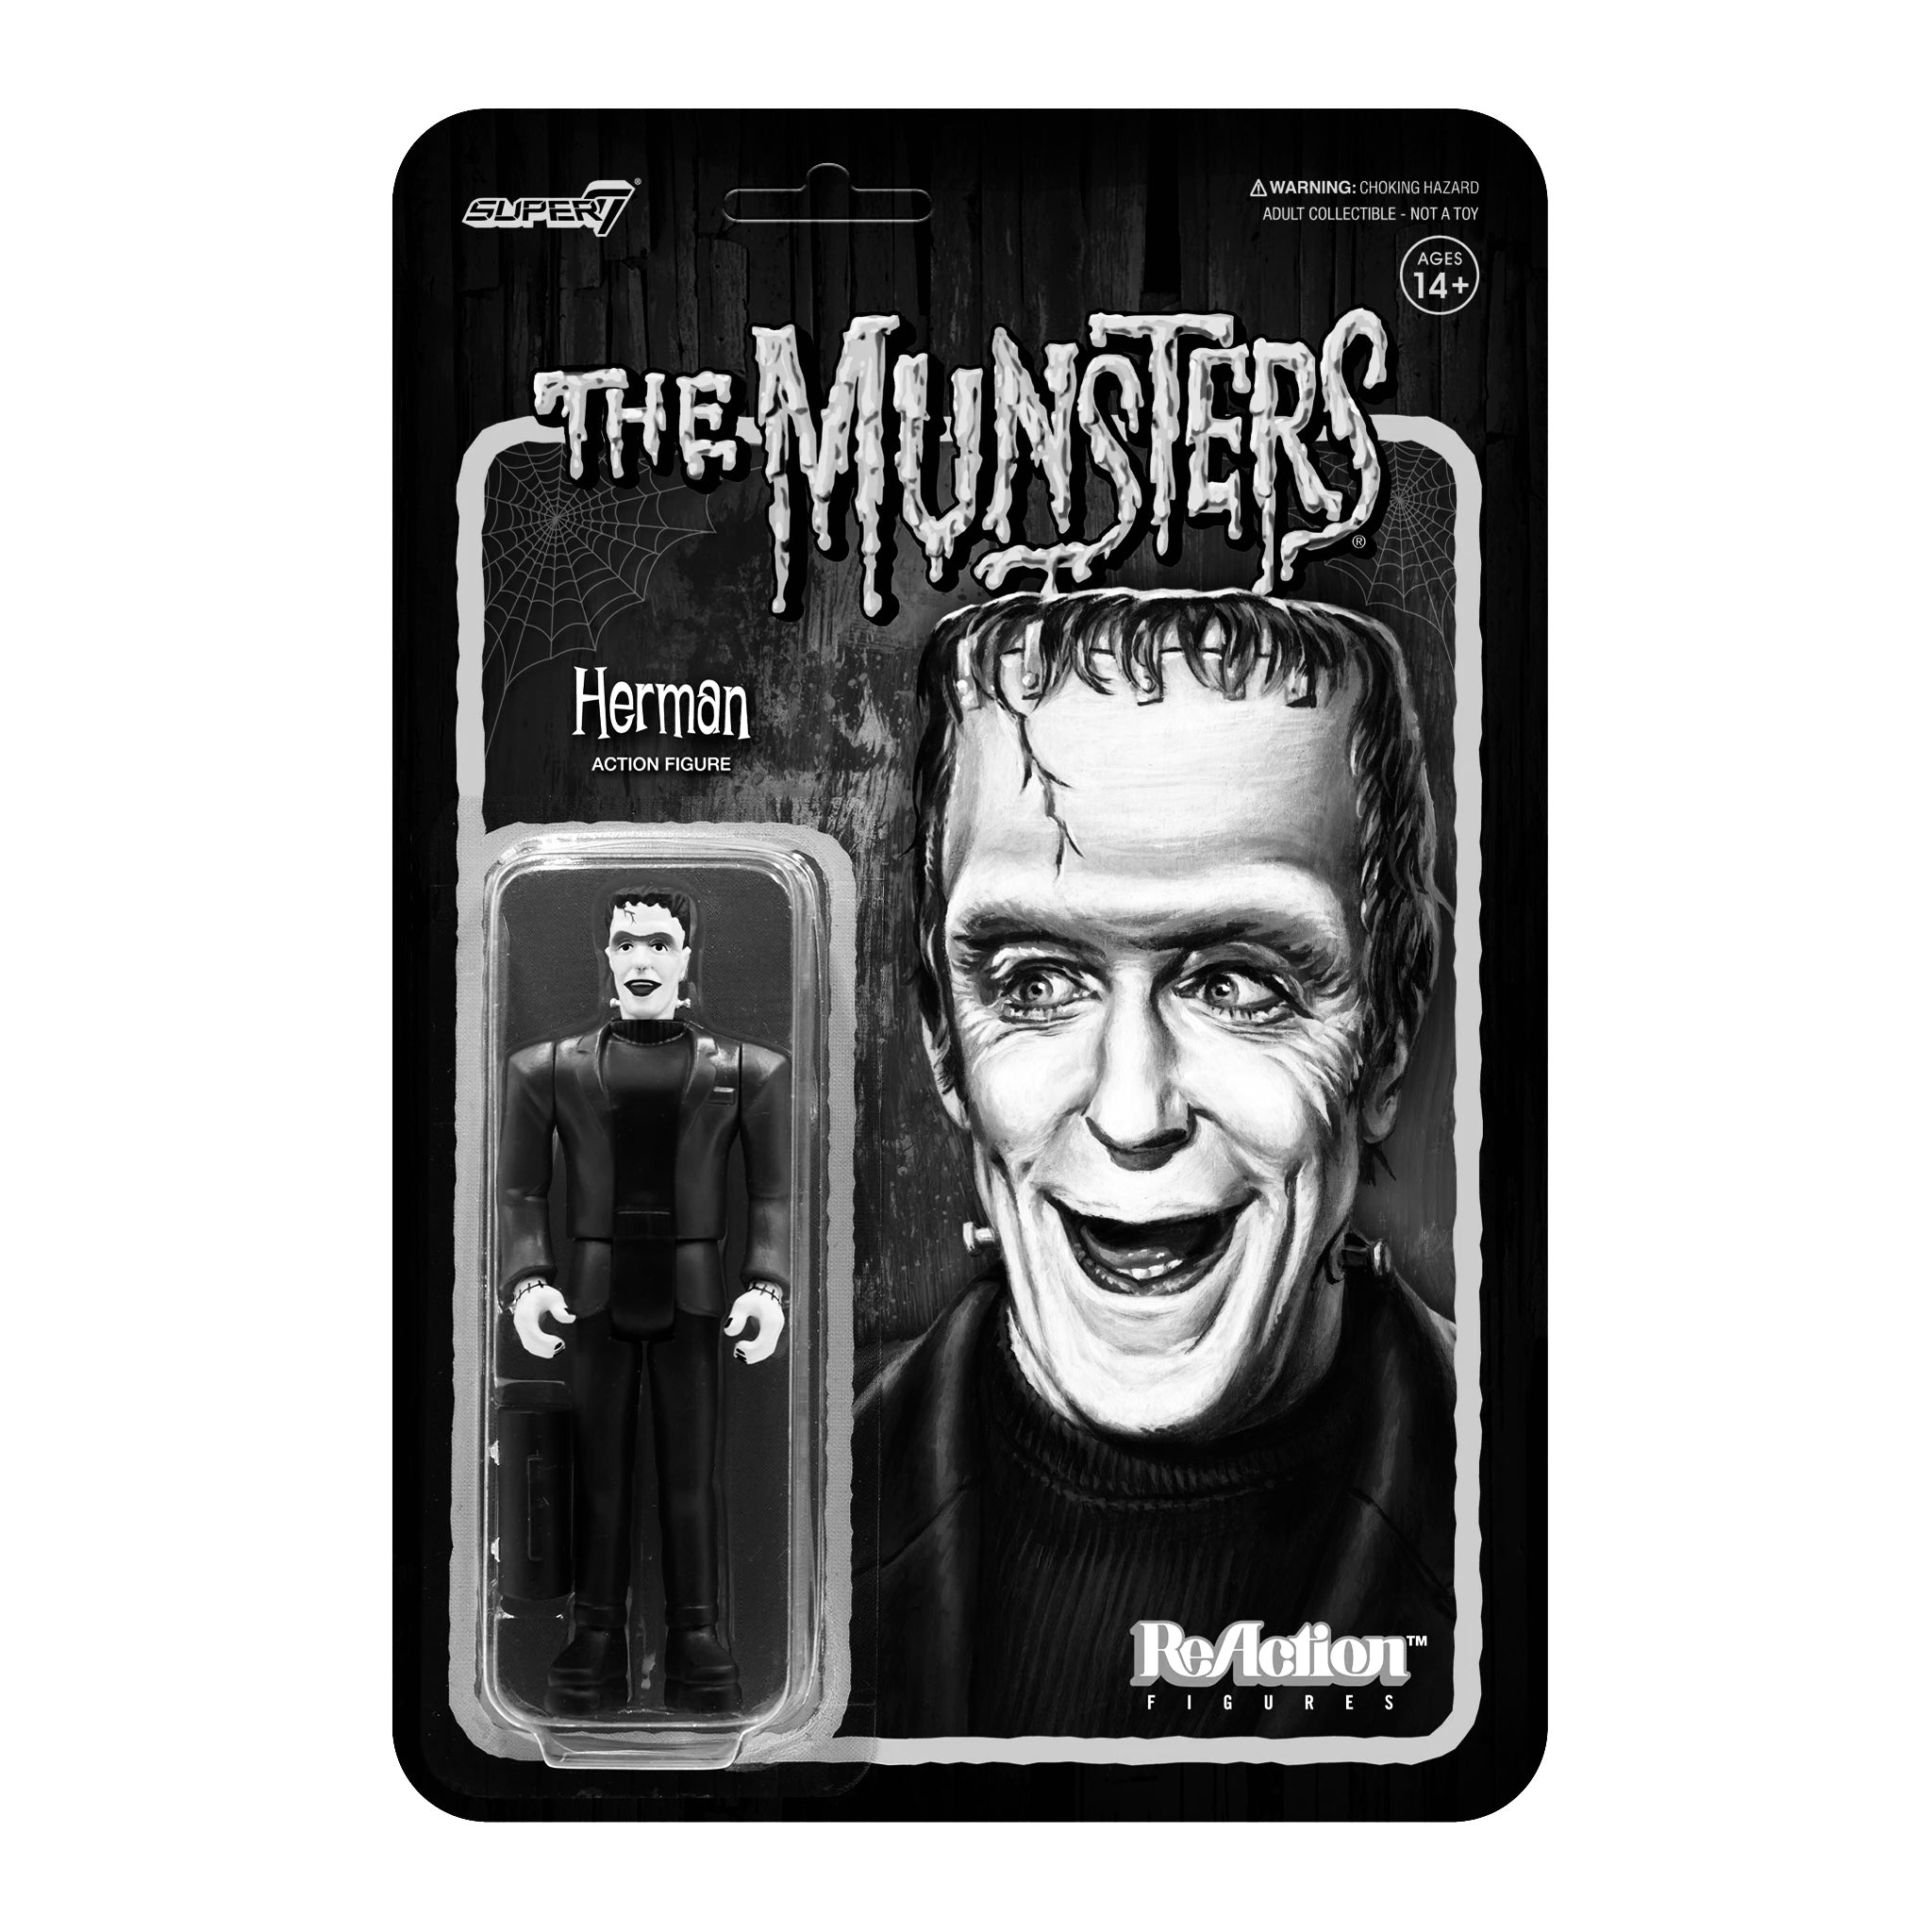 Munsters ReAction Wave 2 Herman Munster (Grayscale)